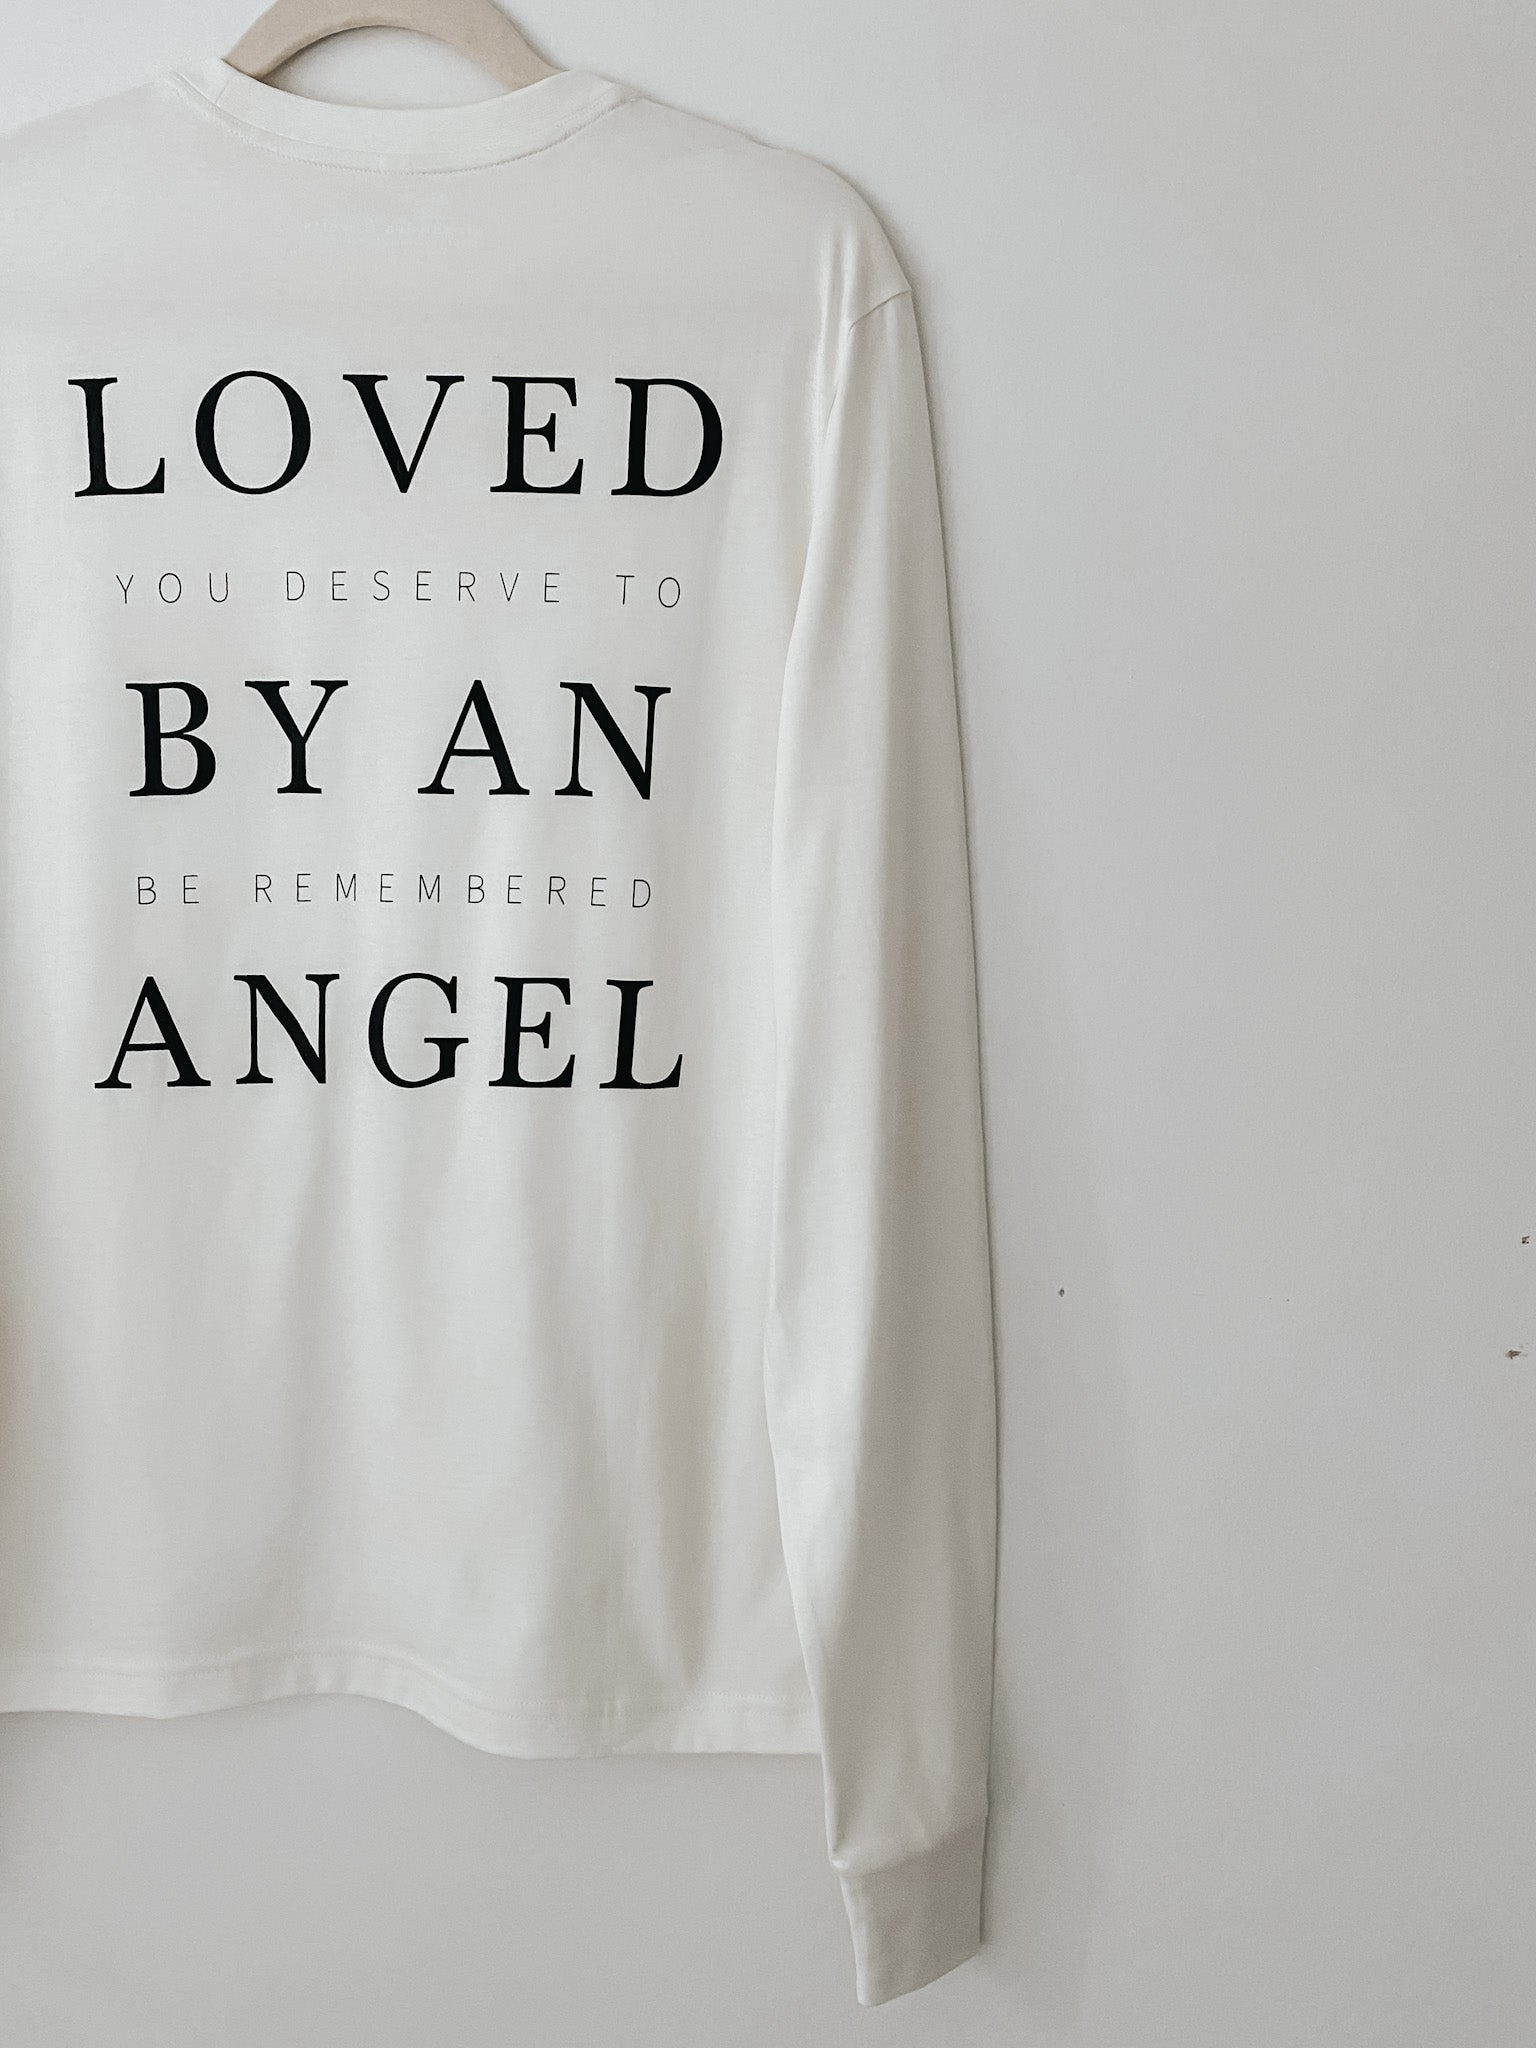 Signature Long Sleeve Tee | Loved By An Angel